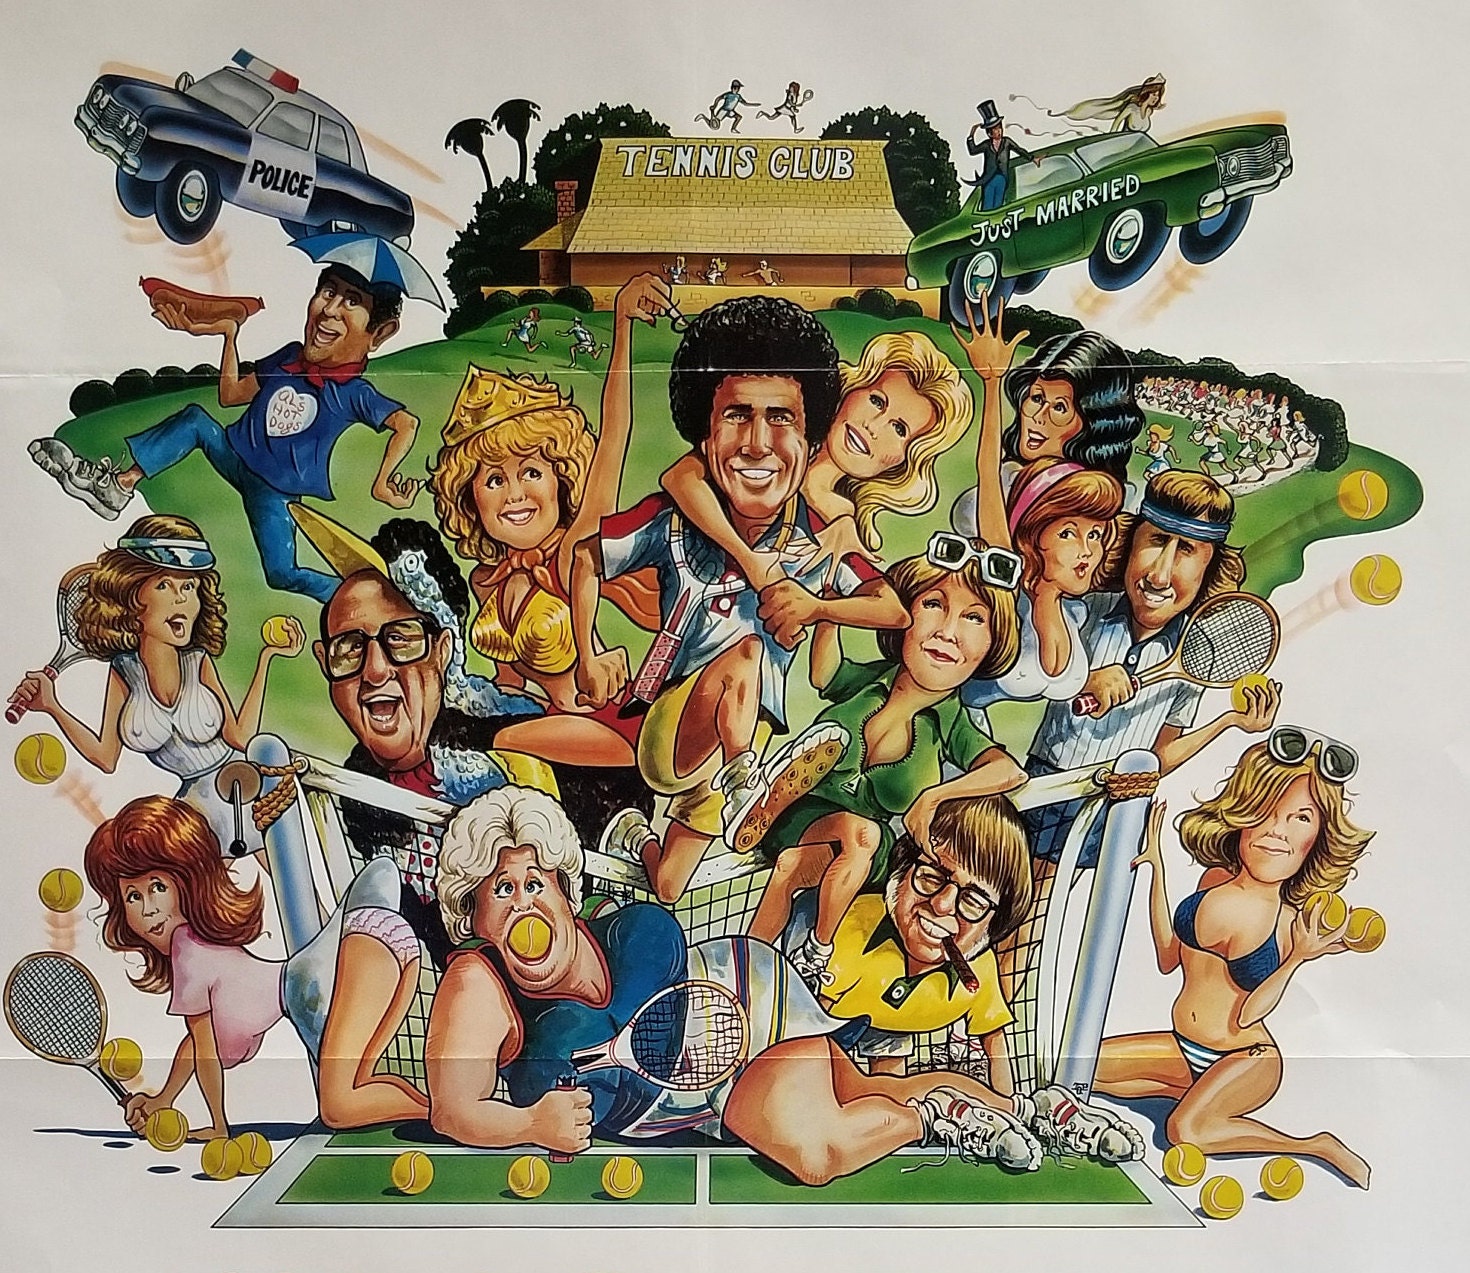 Racquet-Rare Original Vintage Movie Poster from the 1970s Tennis Sex Comedy with Bert Convy, Bobby Riggs, Tonya Roberts and Björn Borg